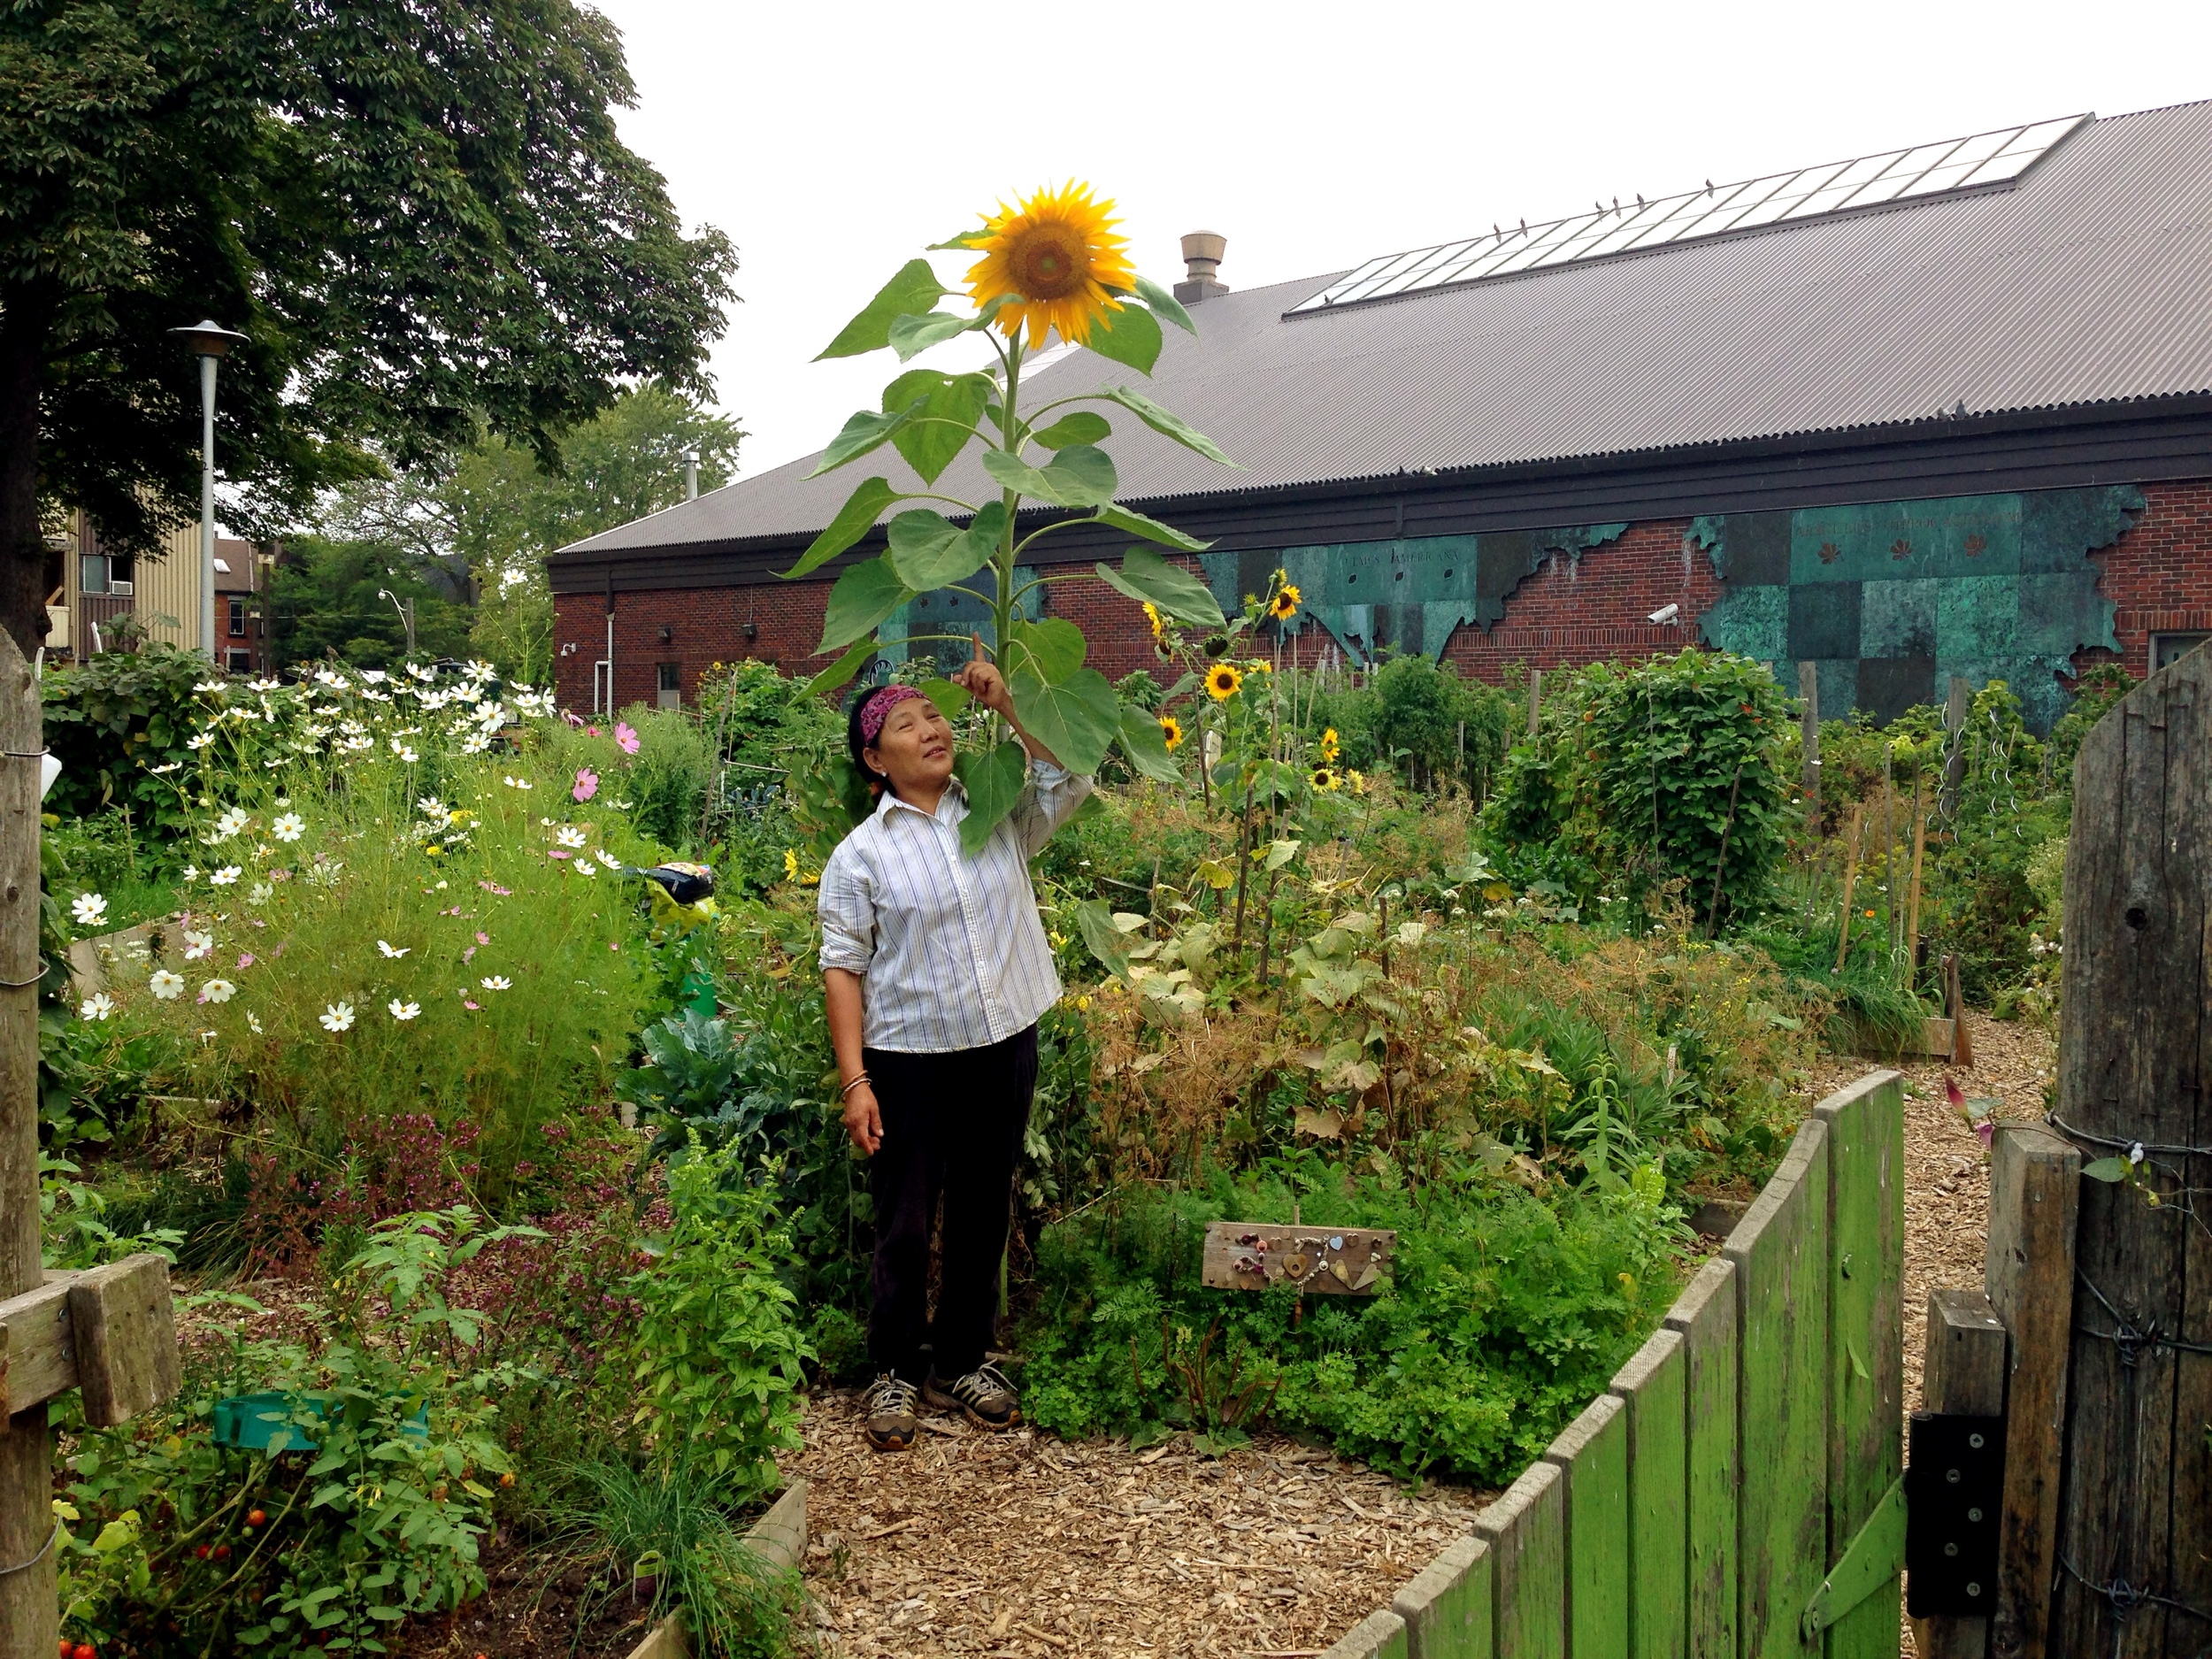  A woman standing in front of a very tall sunflower in the HOPE Community Garden 